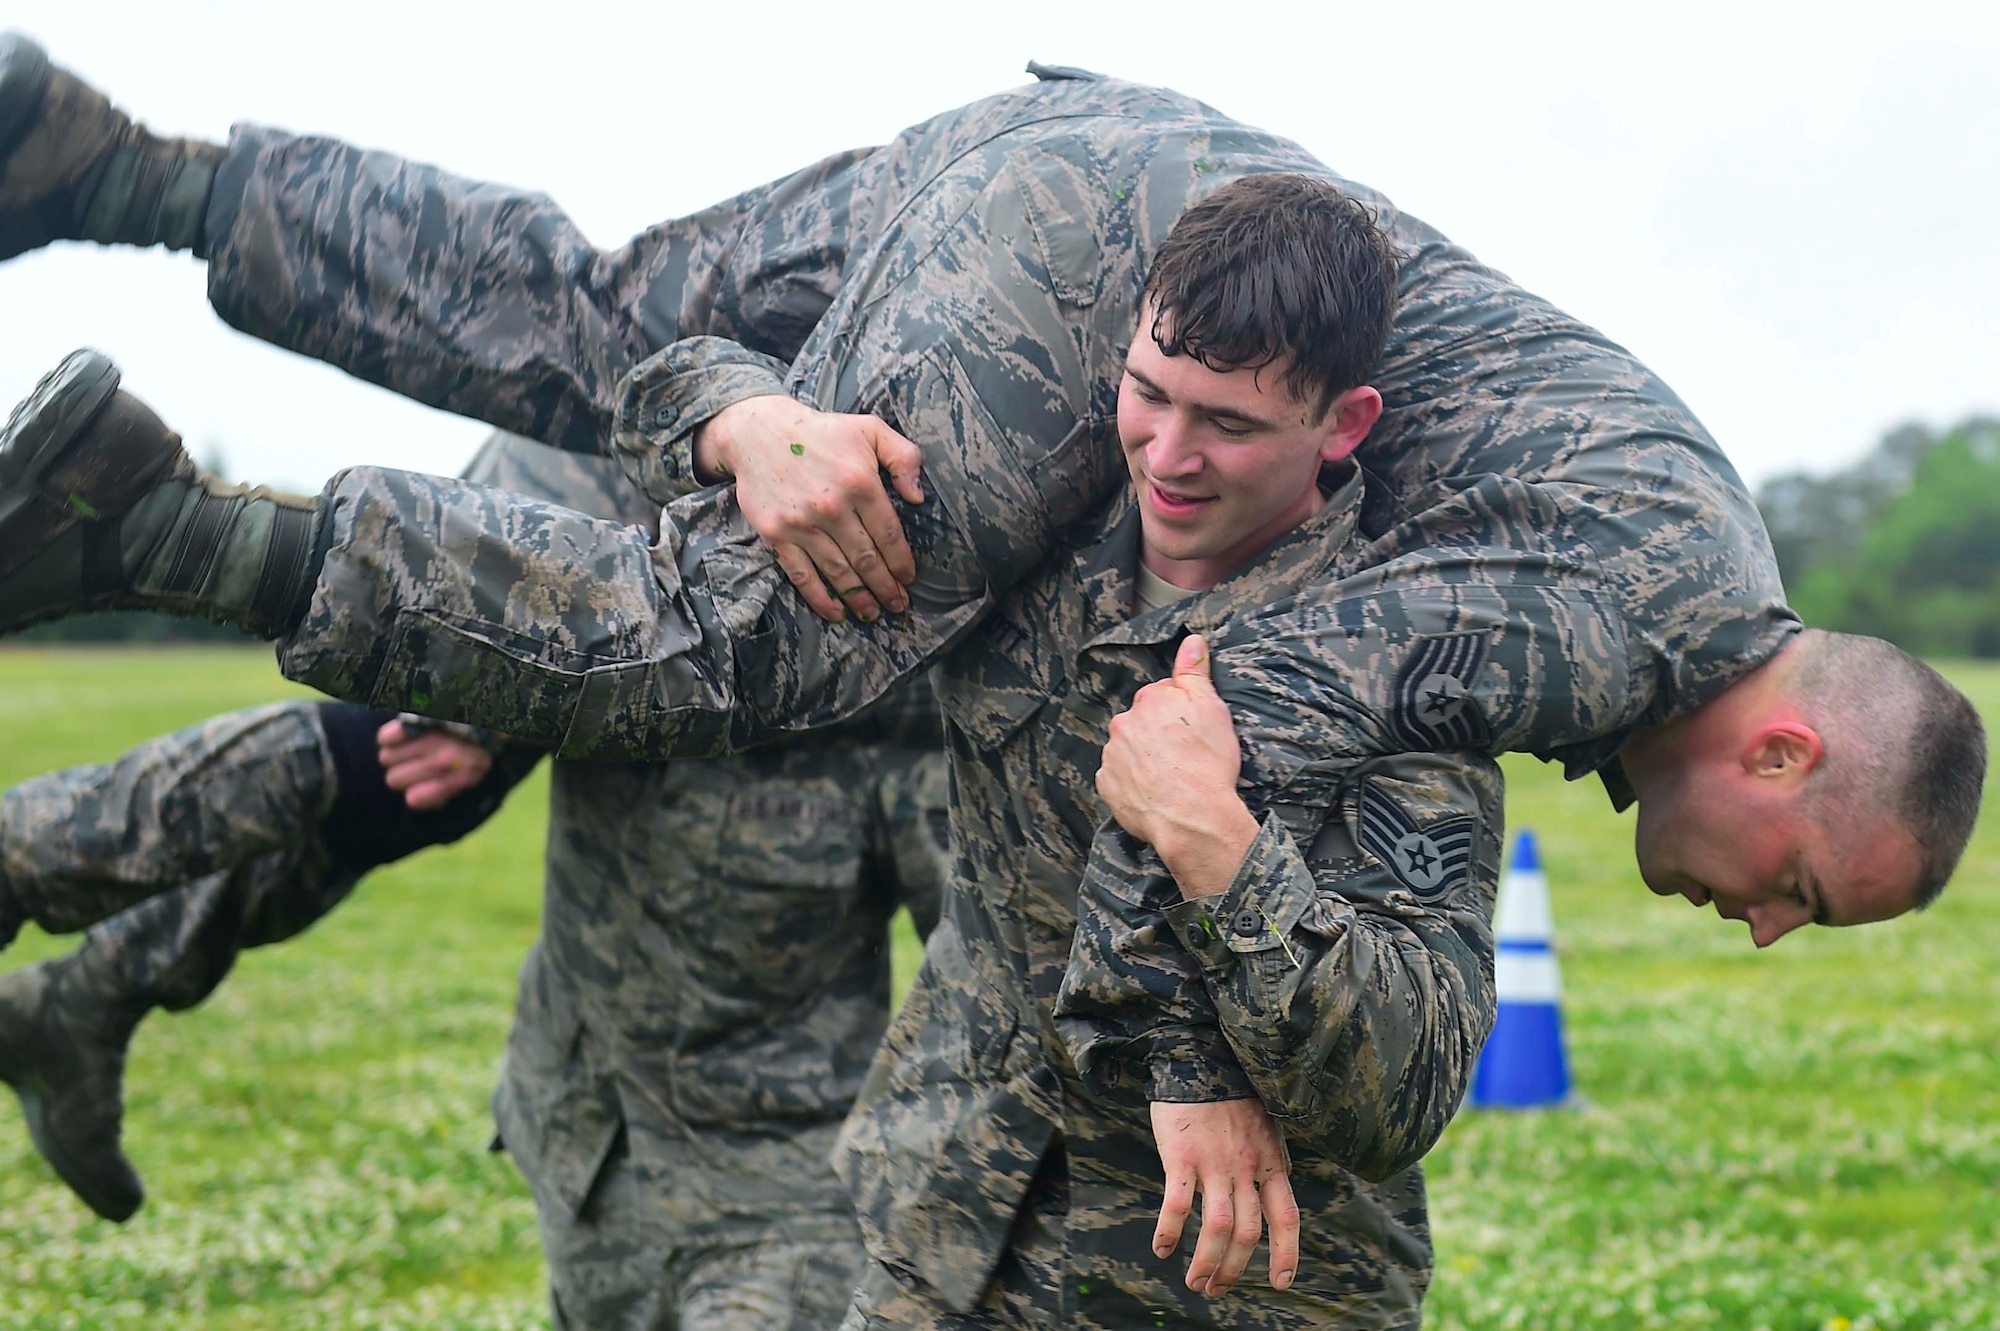 U.S. Air Force Staff Sgt. Gary Good, 633rd Security Forces Squadron unit trainer, performs a buddy carry during a modified Marine Combat Fitness Test at Joint Base Langley-Eustis, Va., April 28, 2017. During the modified Marine Combat Physical Test, Good and his fellow members of the 633rd SFS Emergency Services Team performed a low crawl, high crawl and a fireman carry. (U.S. Air Force photo/Senior Airman Derek Seifert)